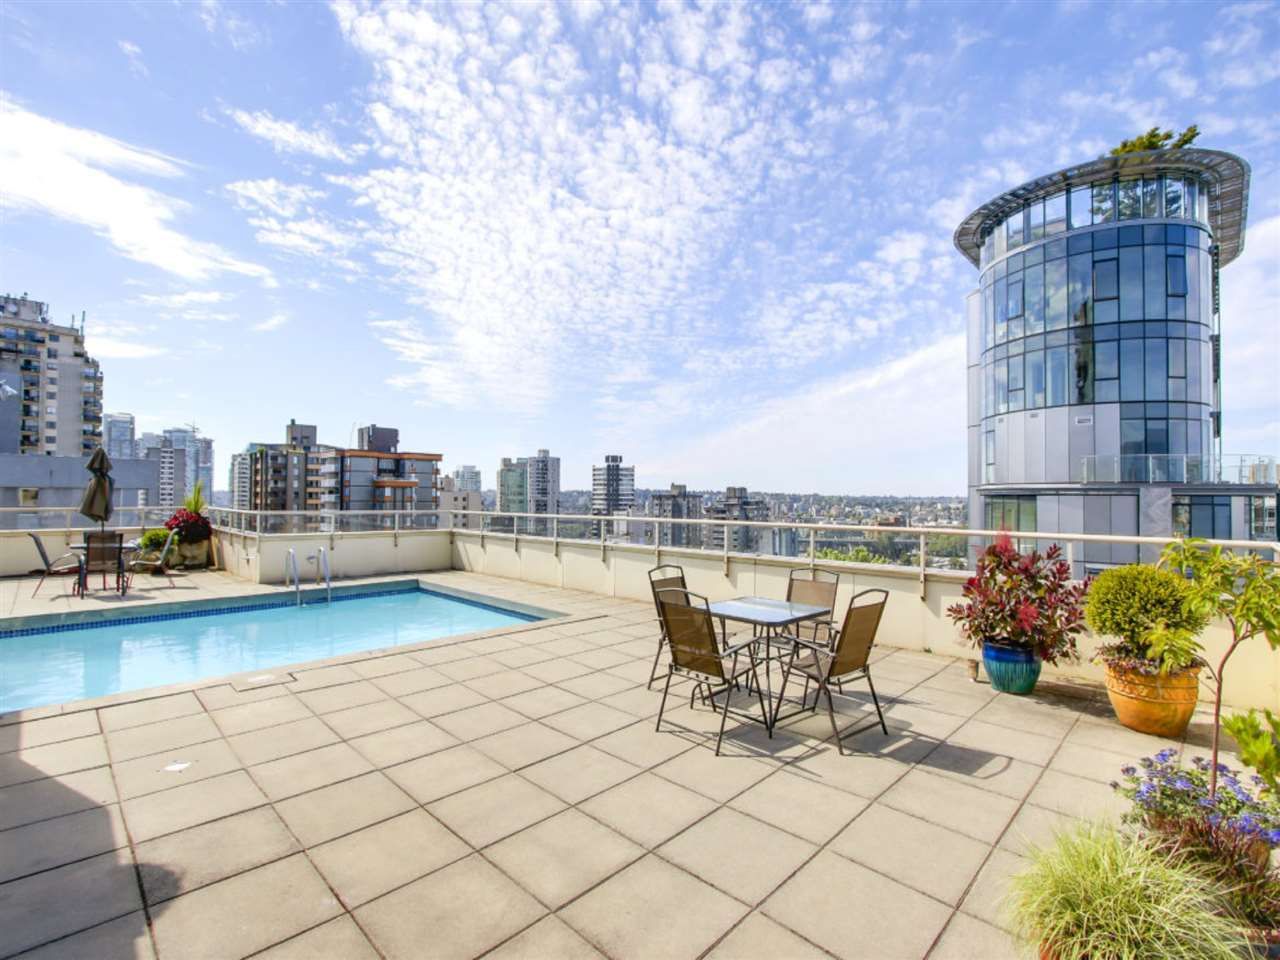 Main Photo: 1004 1250 Burnaby Street in Vancouver: Condo for sale : MLS®# R2417771